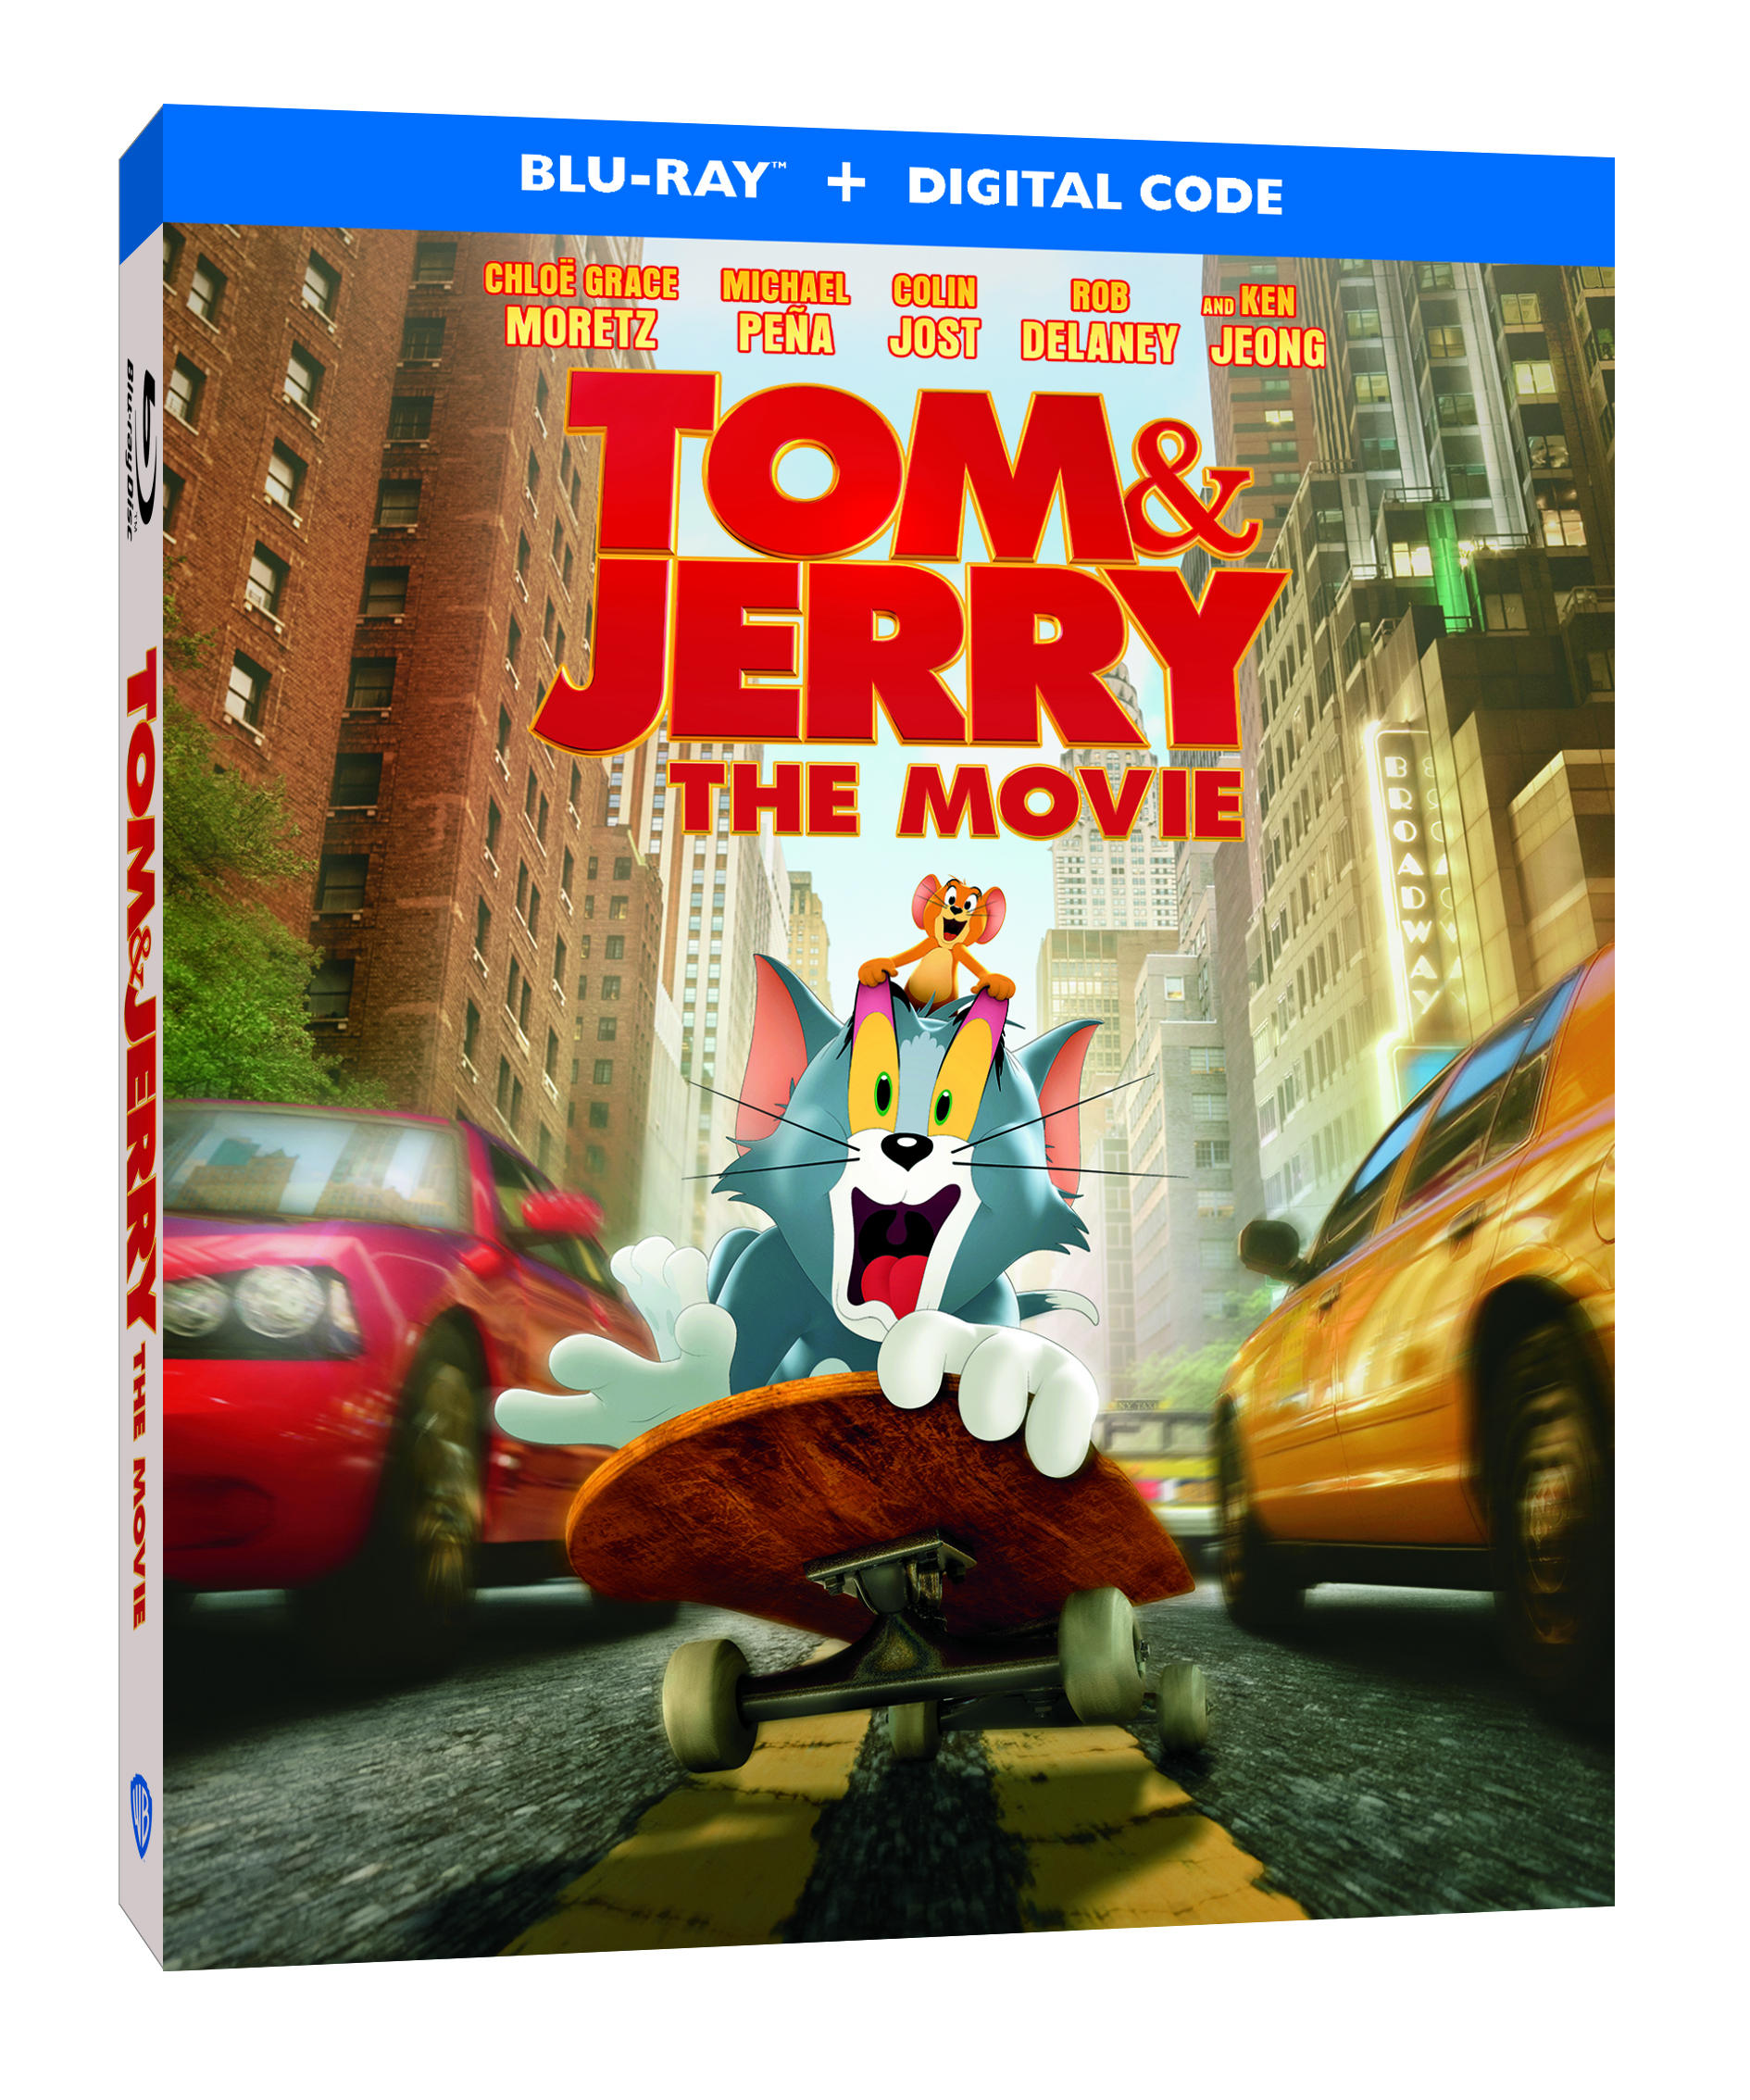 Tom and Jerry (the movie) is available today on Blu-ray, DVD and Digital